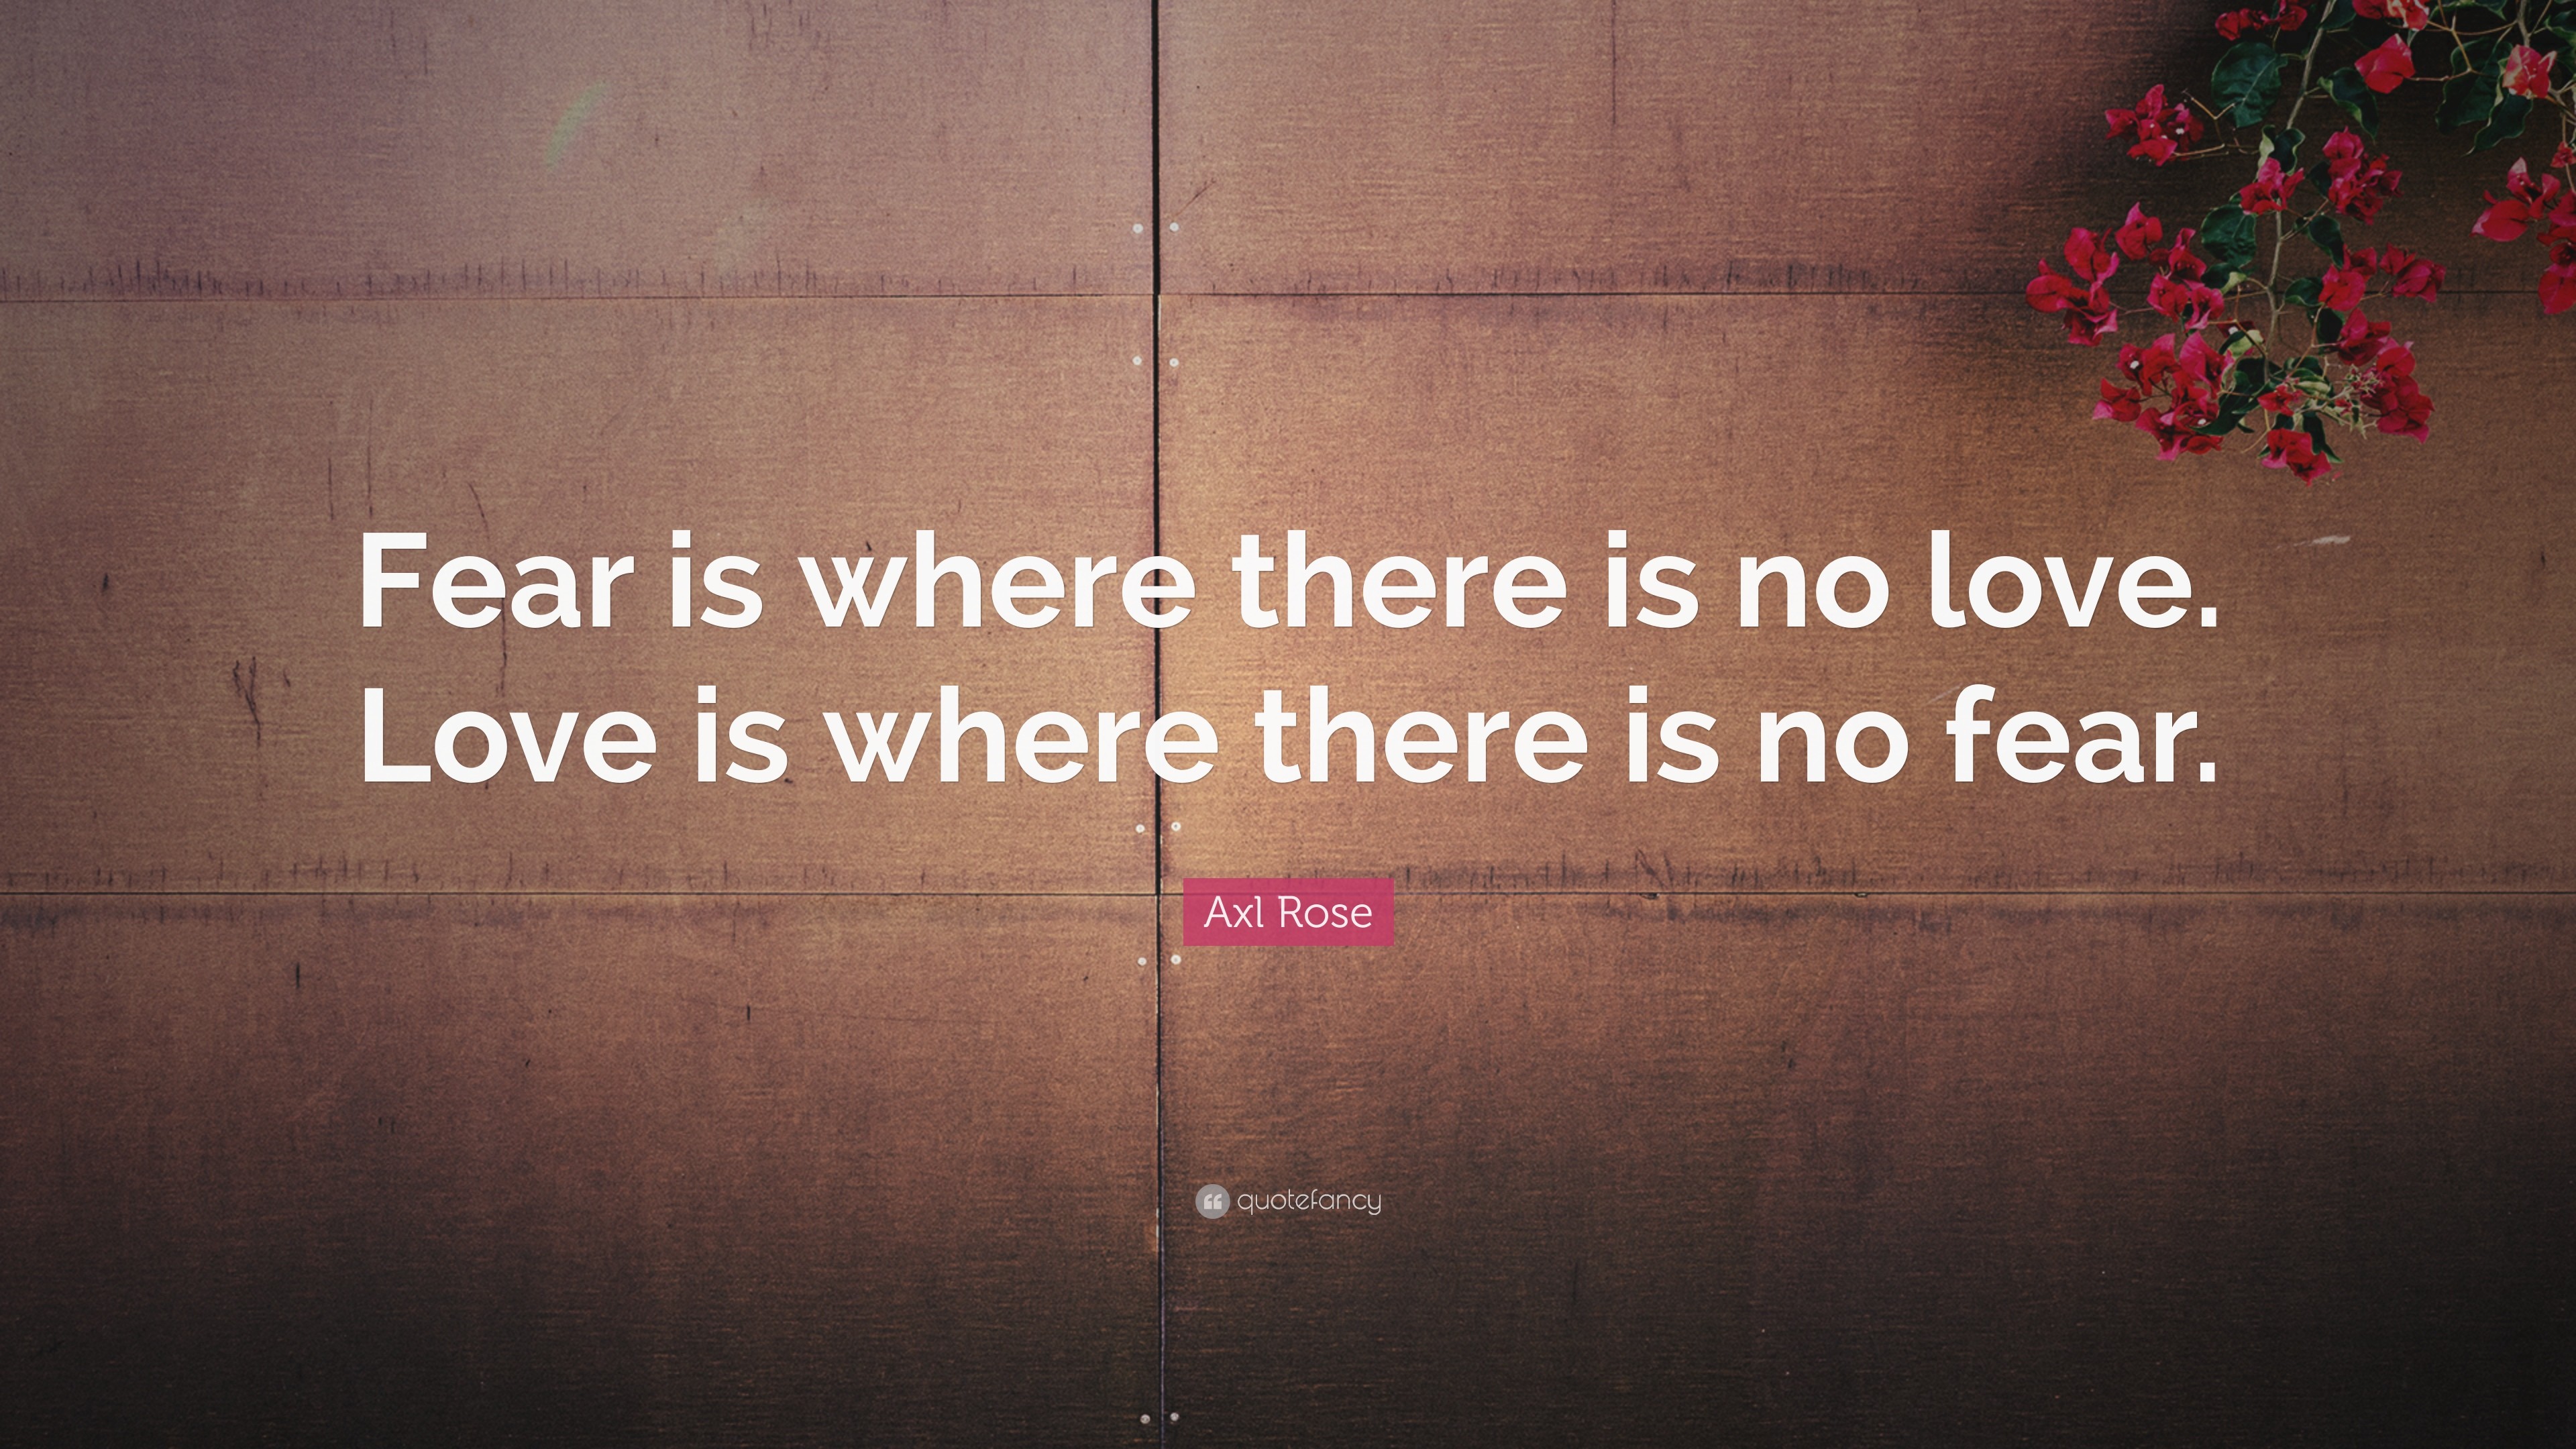 3840x2160 Axl Rose Quote: “Fear is where there is no love. Love is where